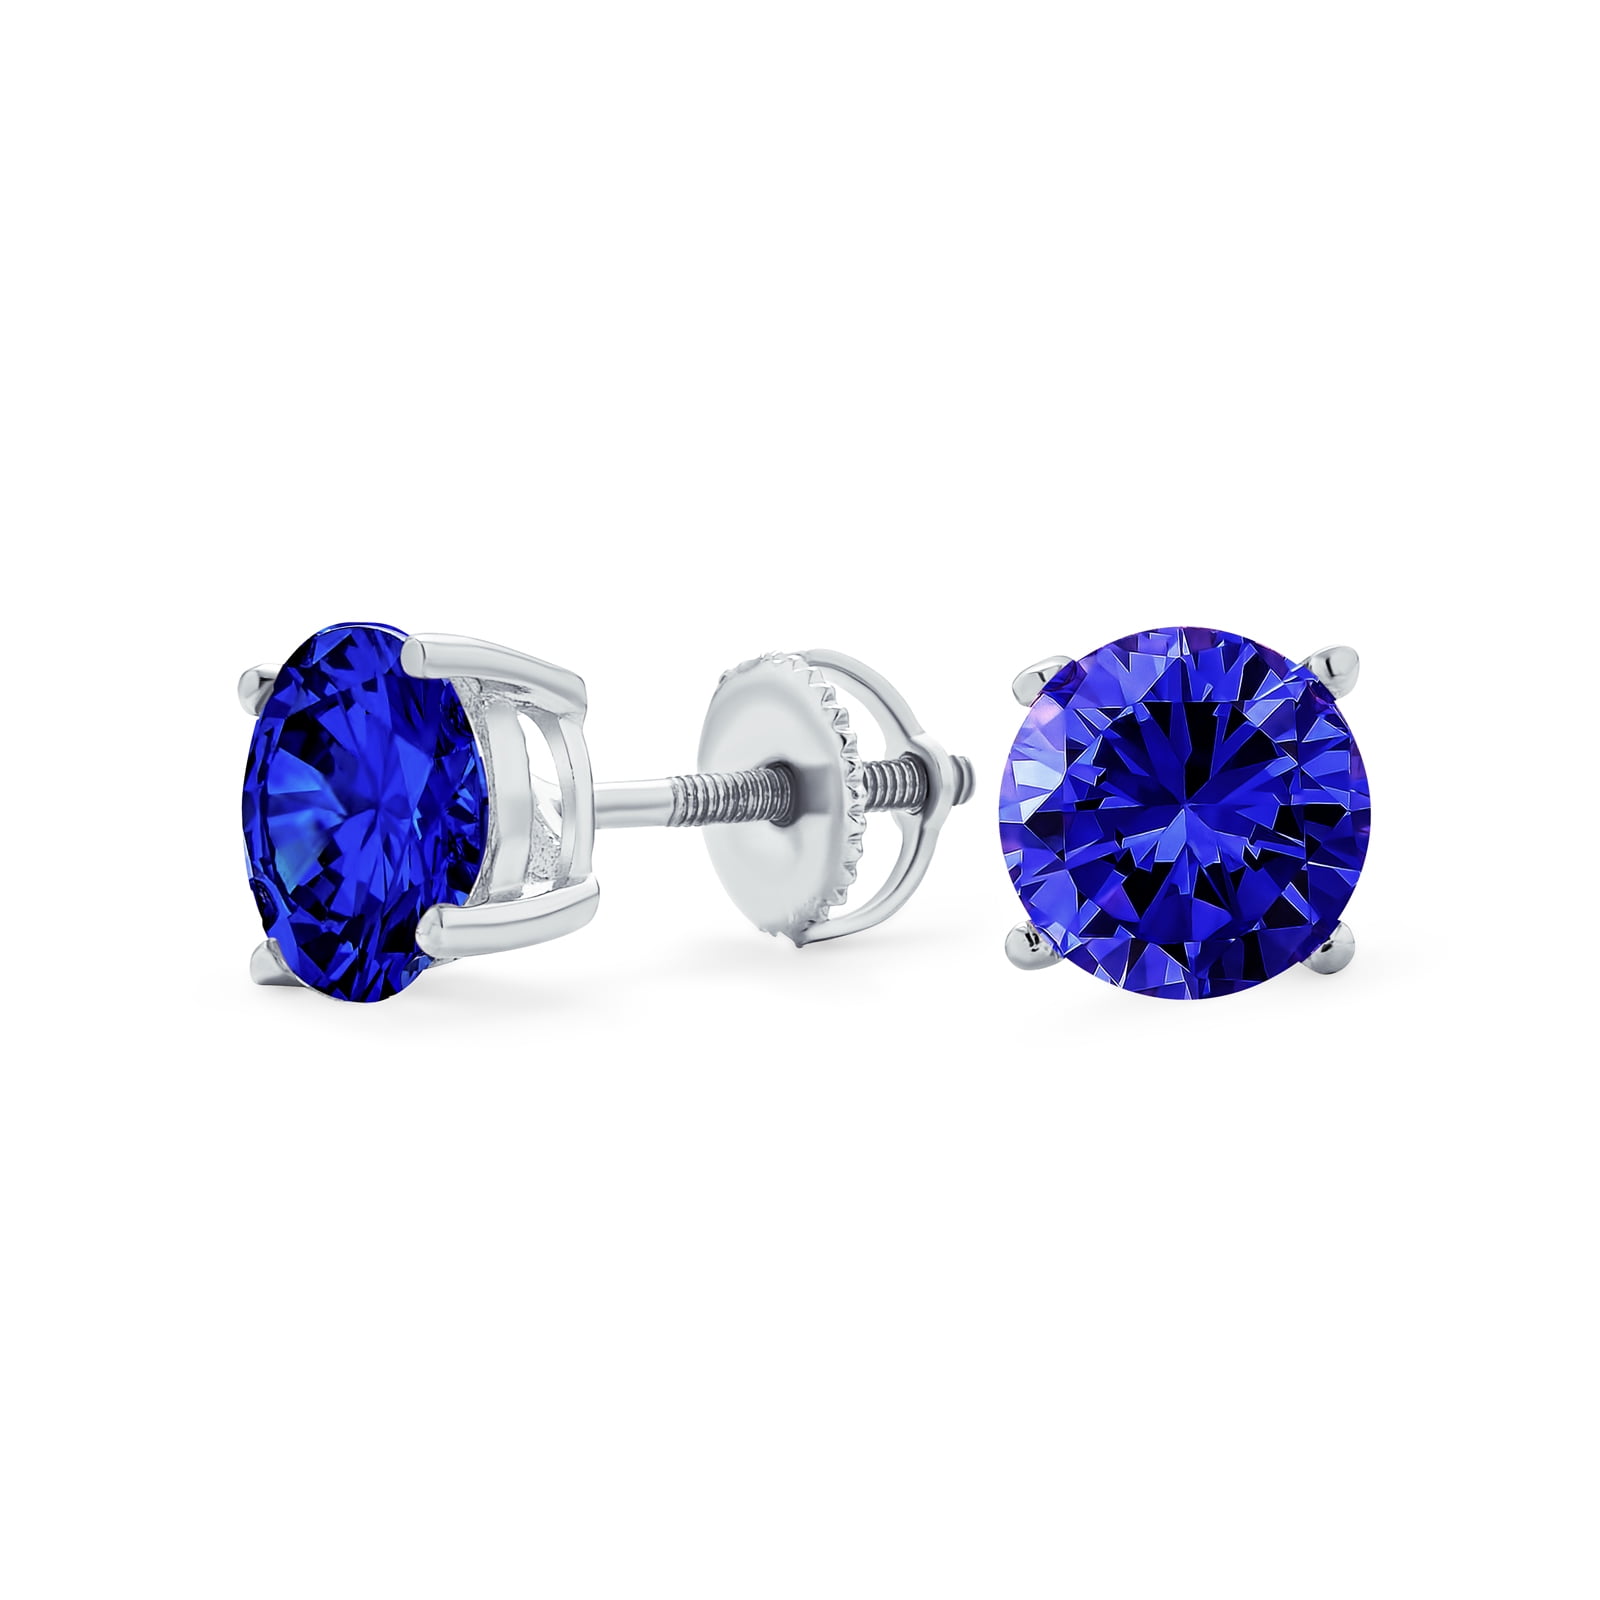 .50CT Round Brilliant Cut AAA CZ Solitaire Stud Earrings For Women Men Sterling Silver Screwback Blue Pink Clear 5MM